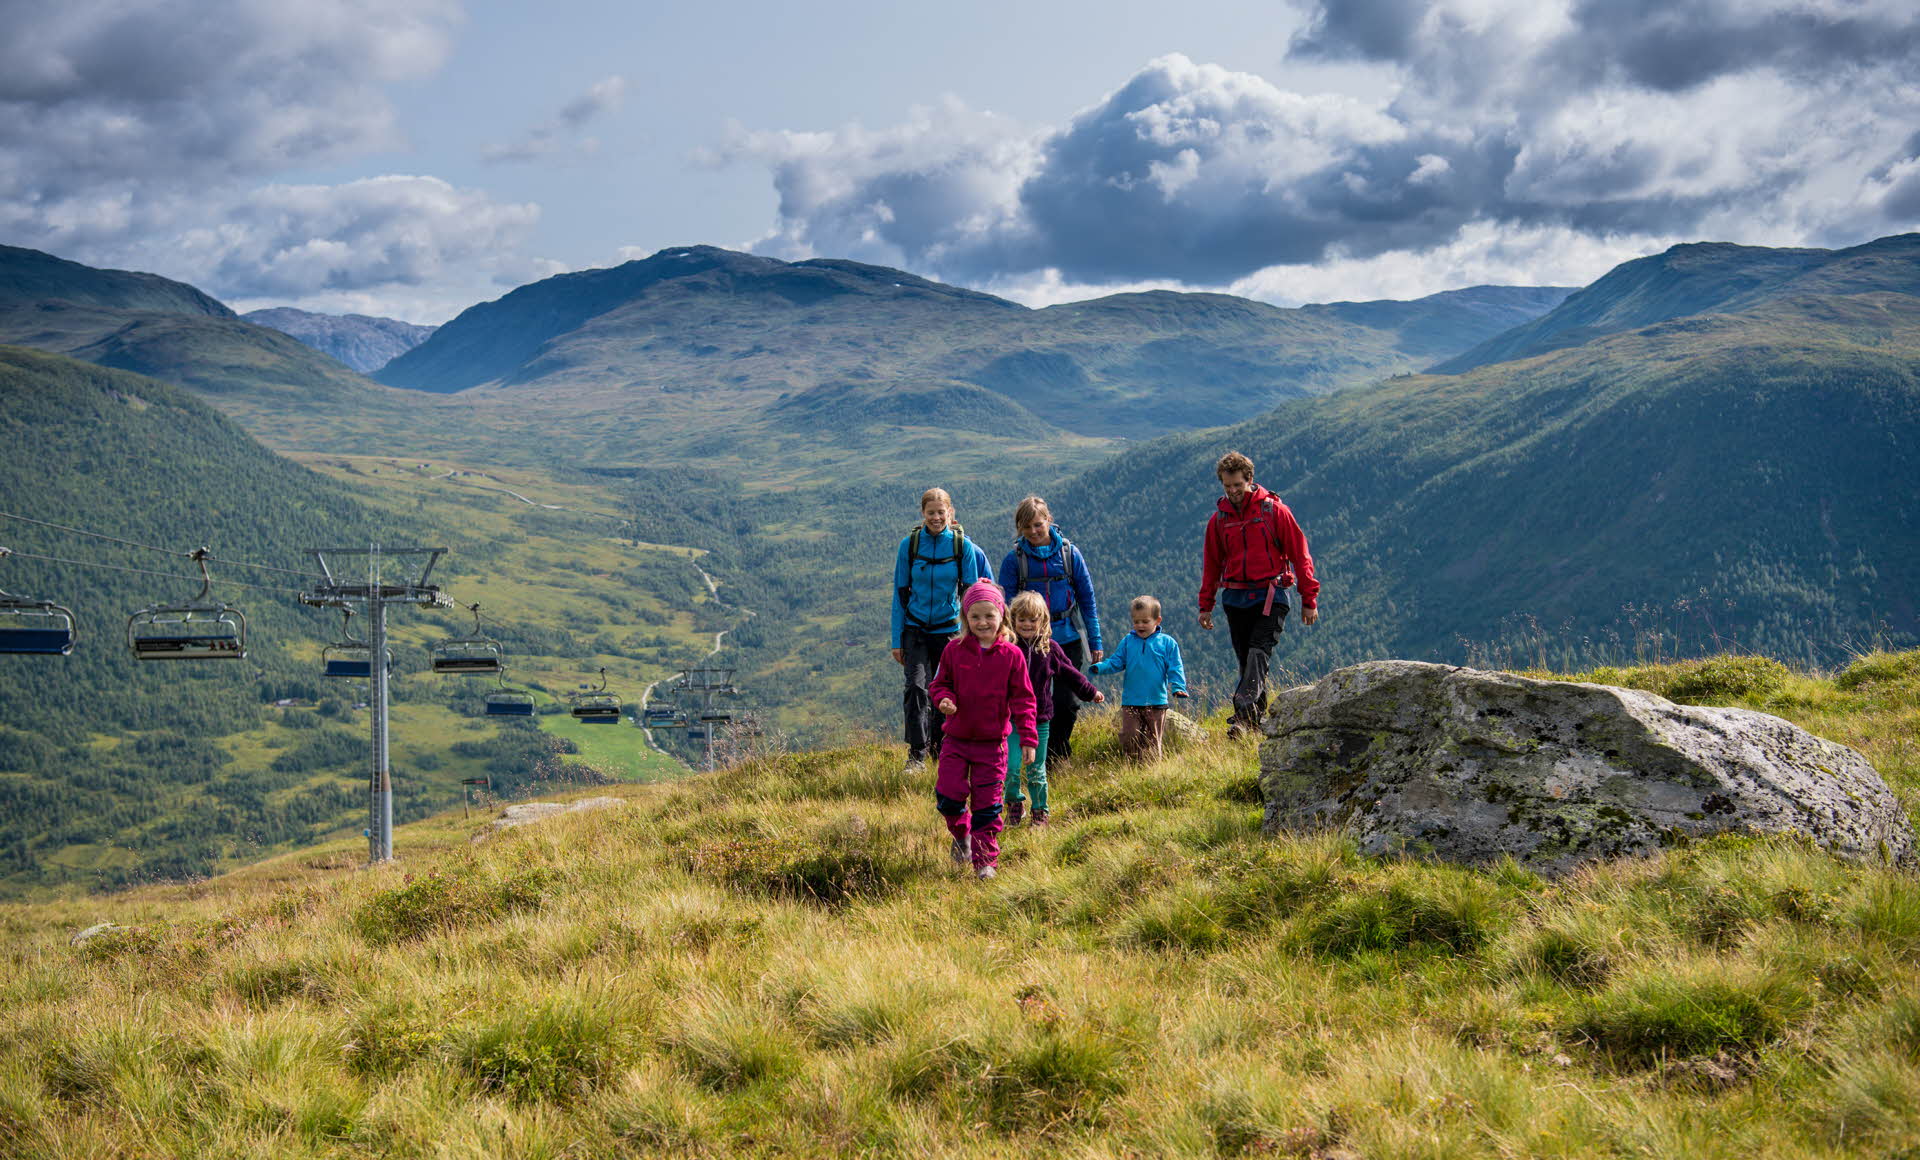 A group of children and adults hiking in the mountains next to a ski lift in Myrkdalen.